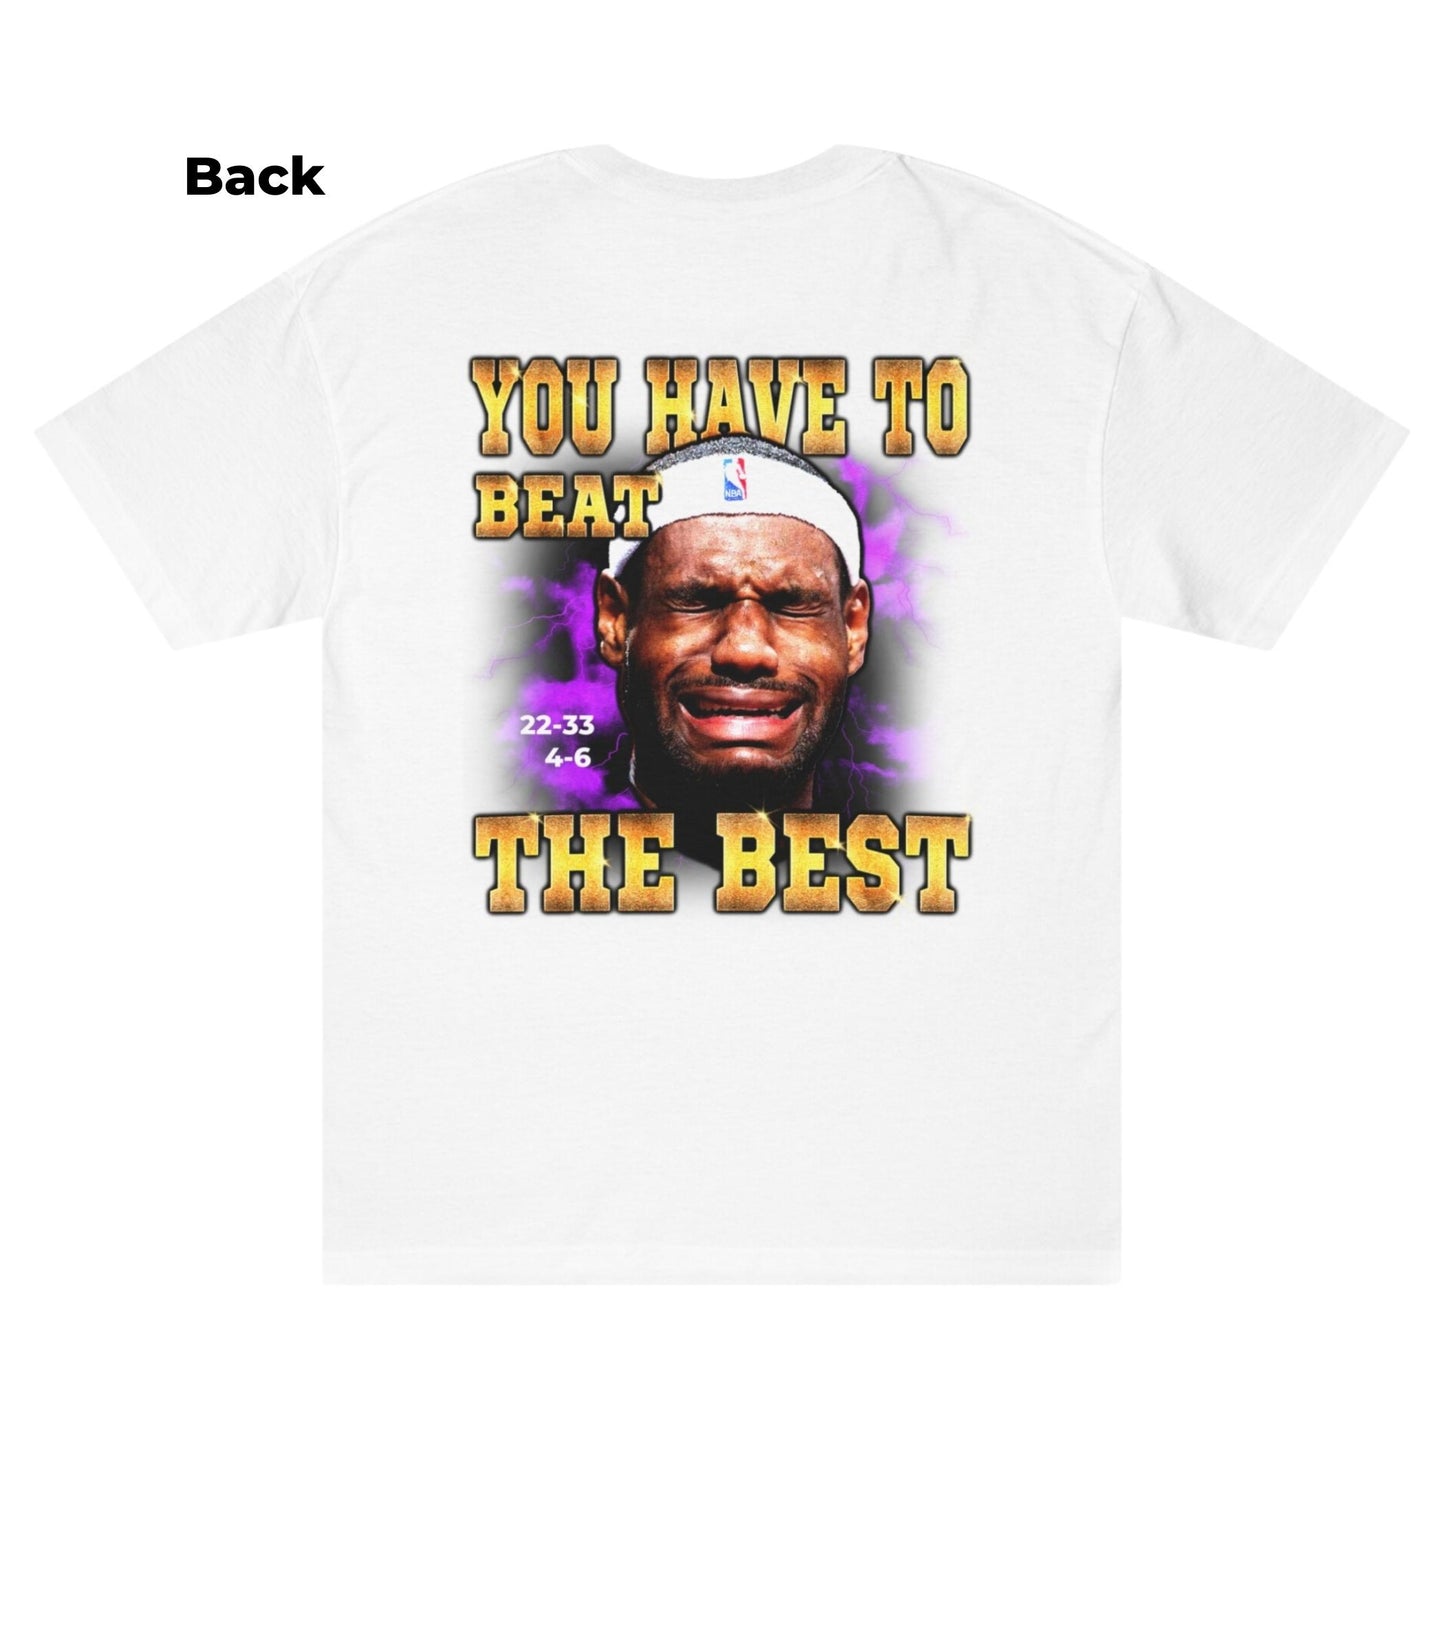 If You Want To Be The Best (White) T-Shirt